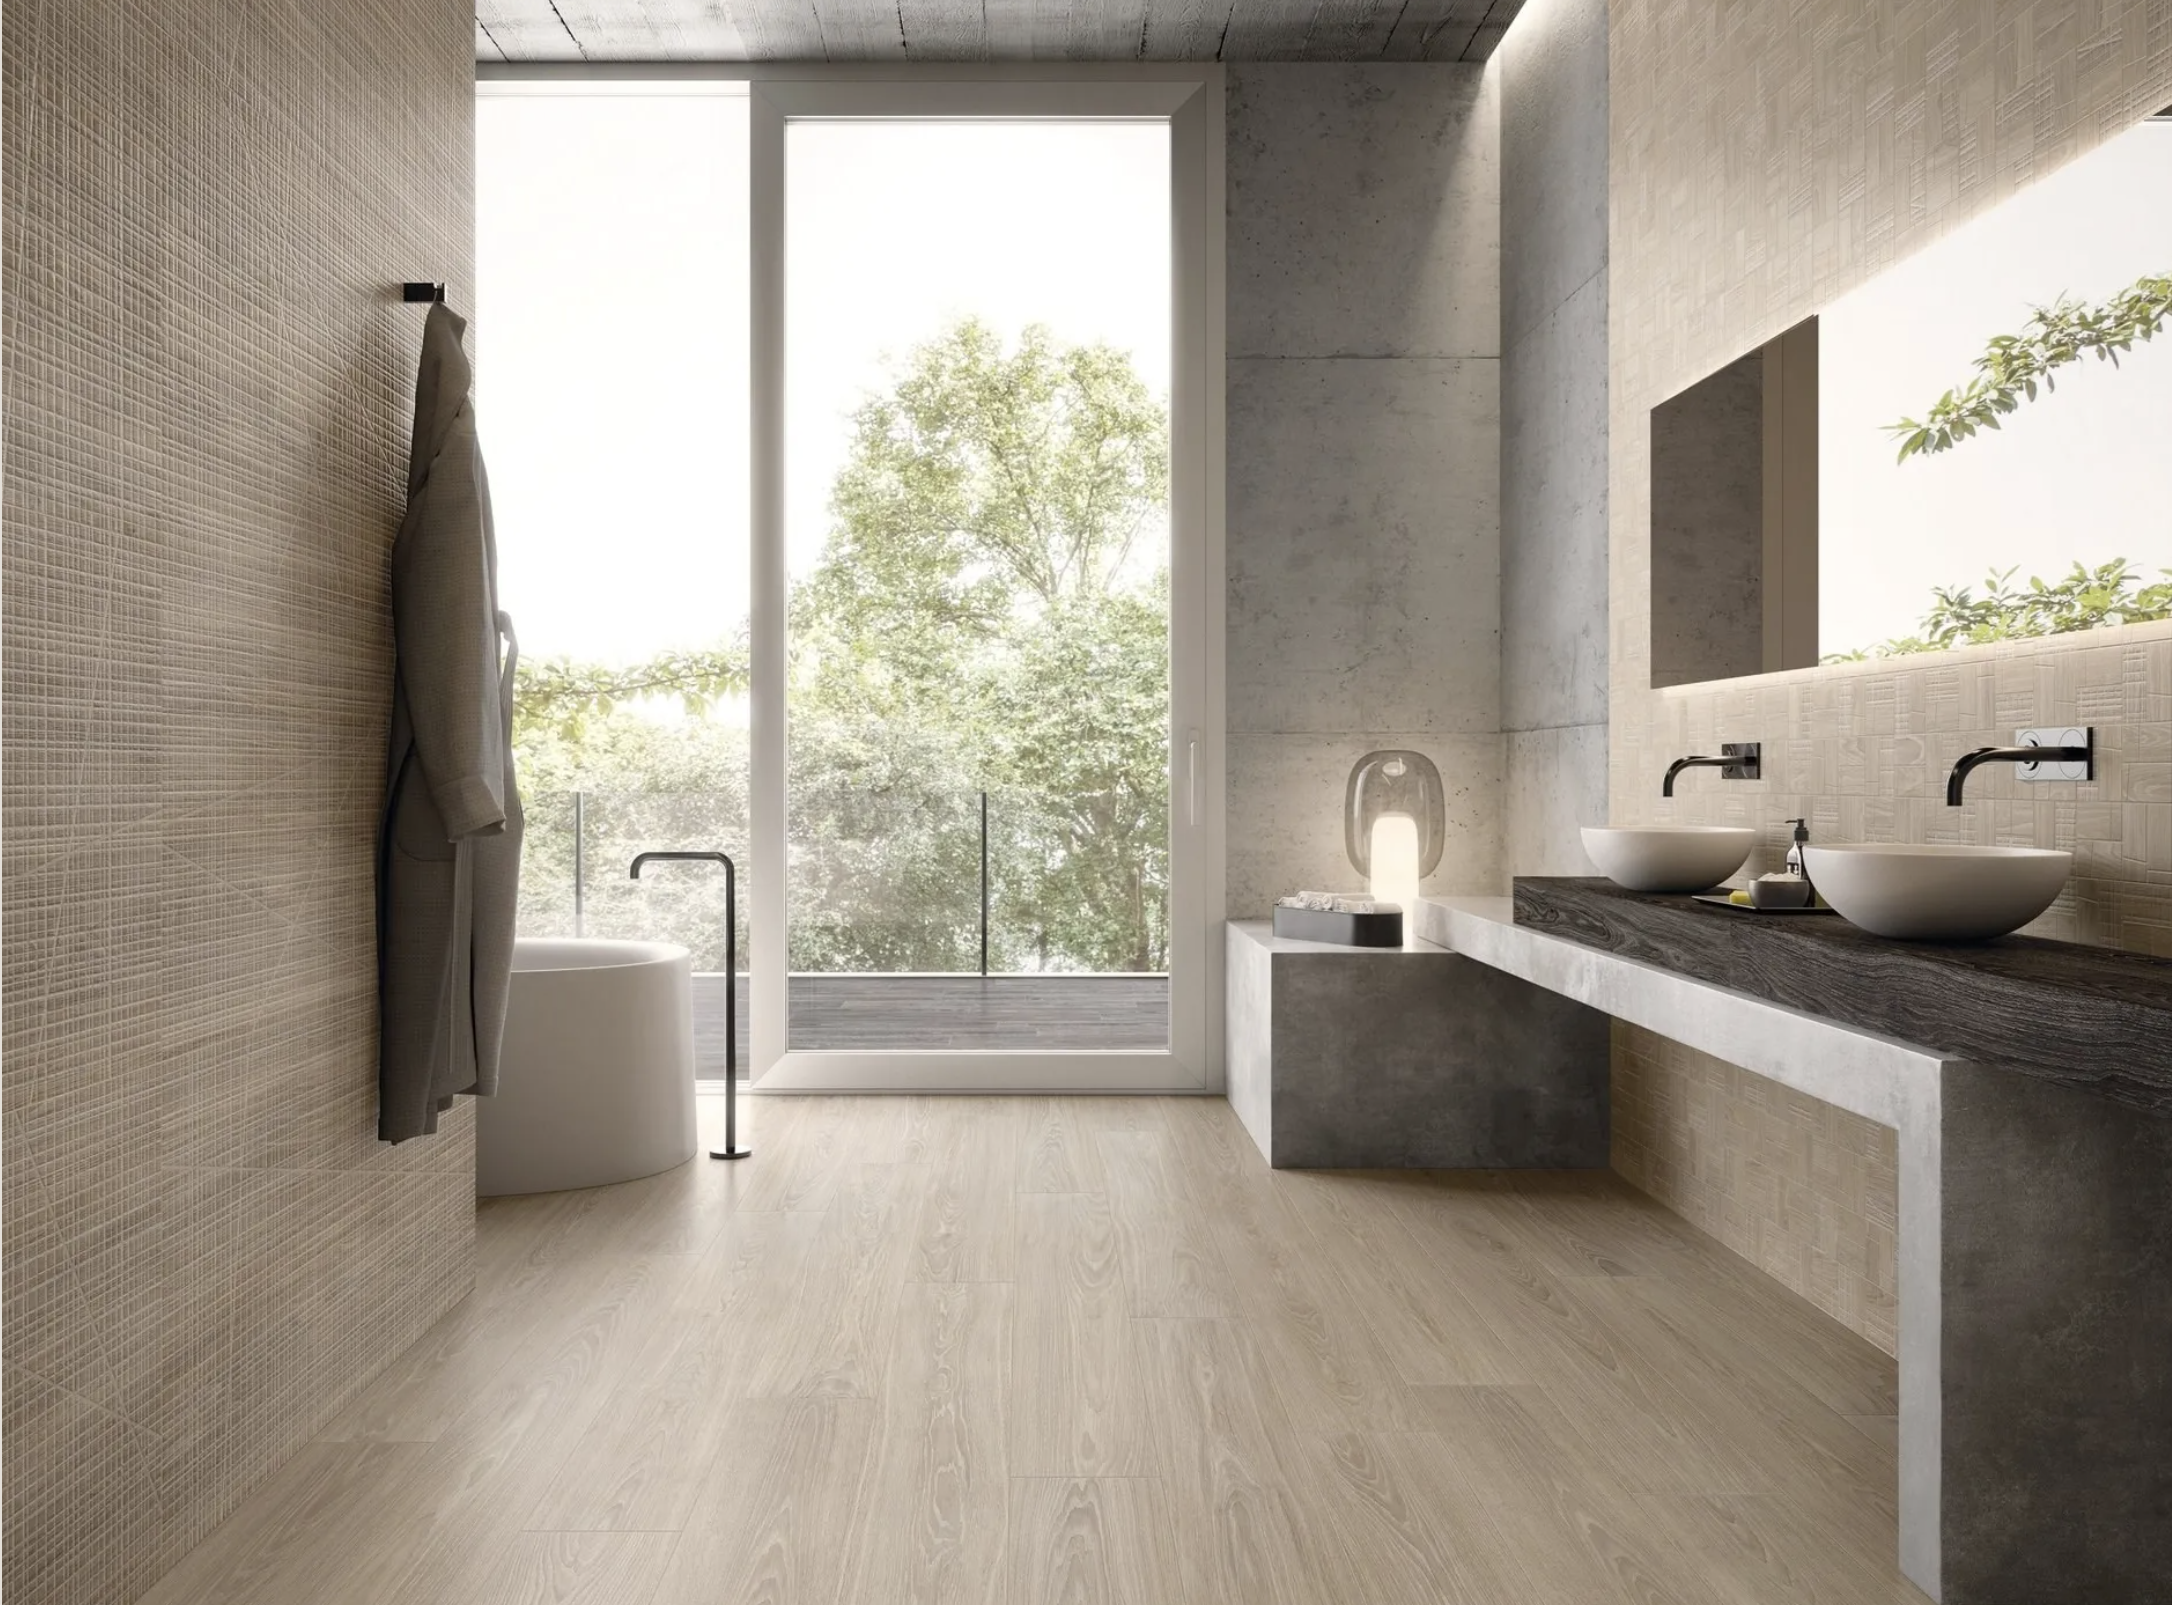 Corda Woodtouch R9 series porcelain tile floor and wall tiles by Ergon Ceramica 20x120 
